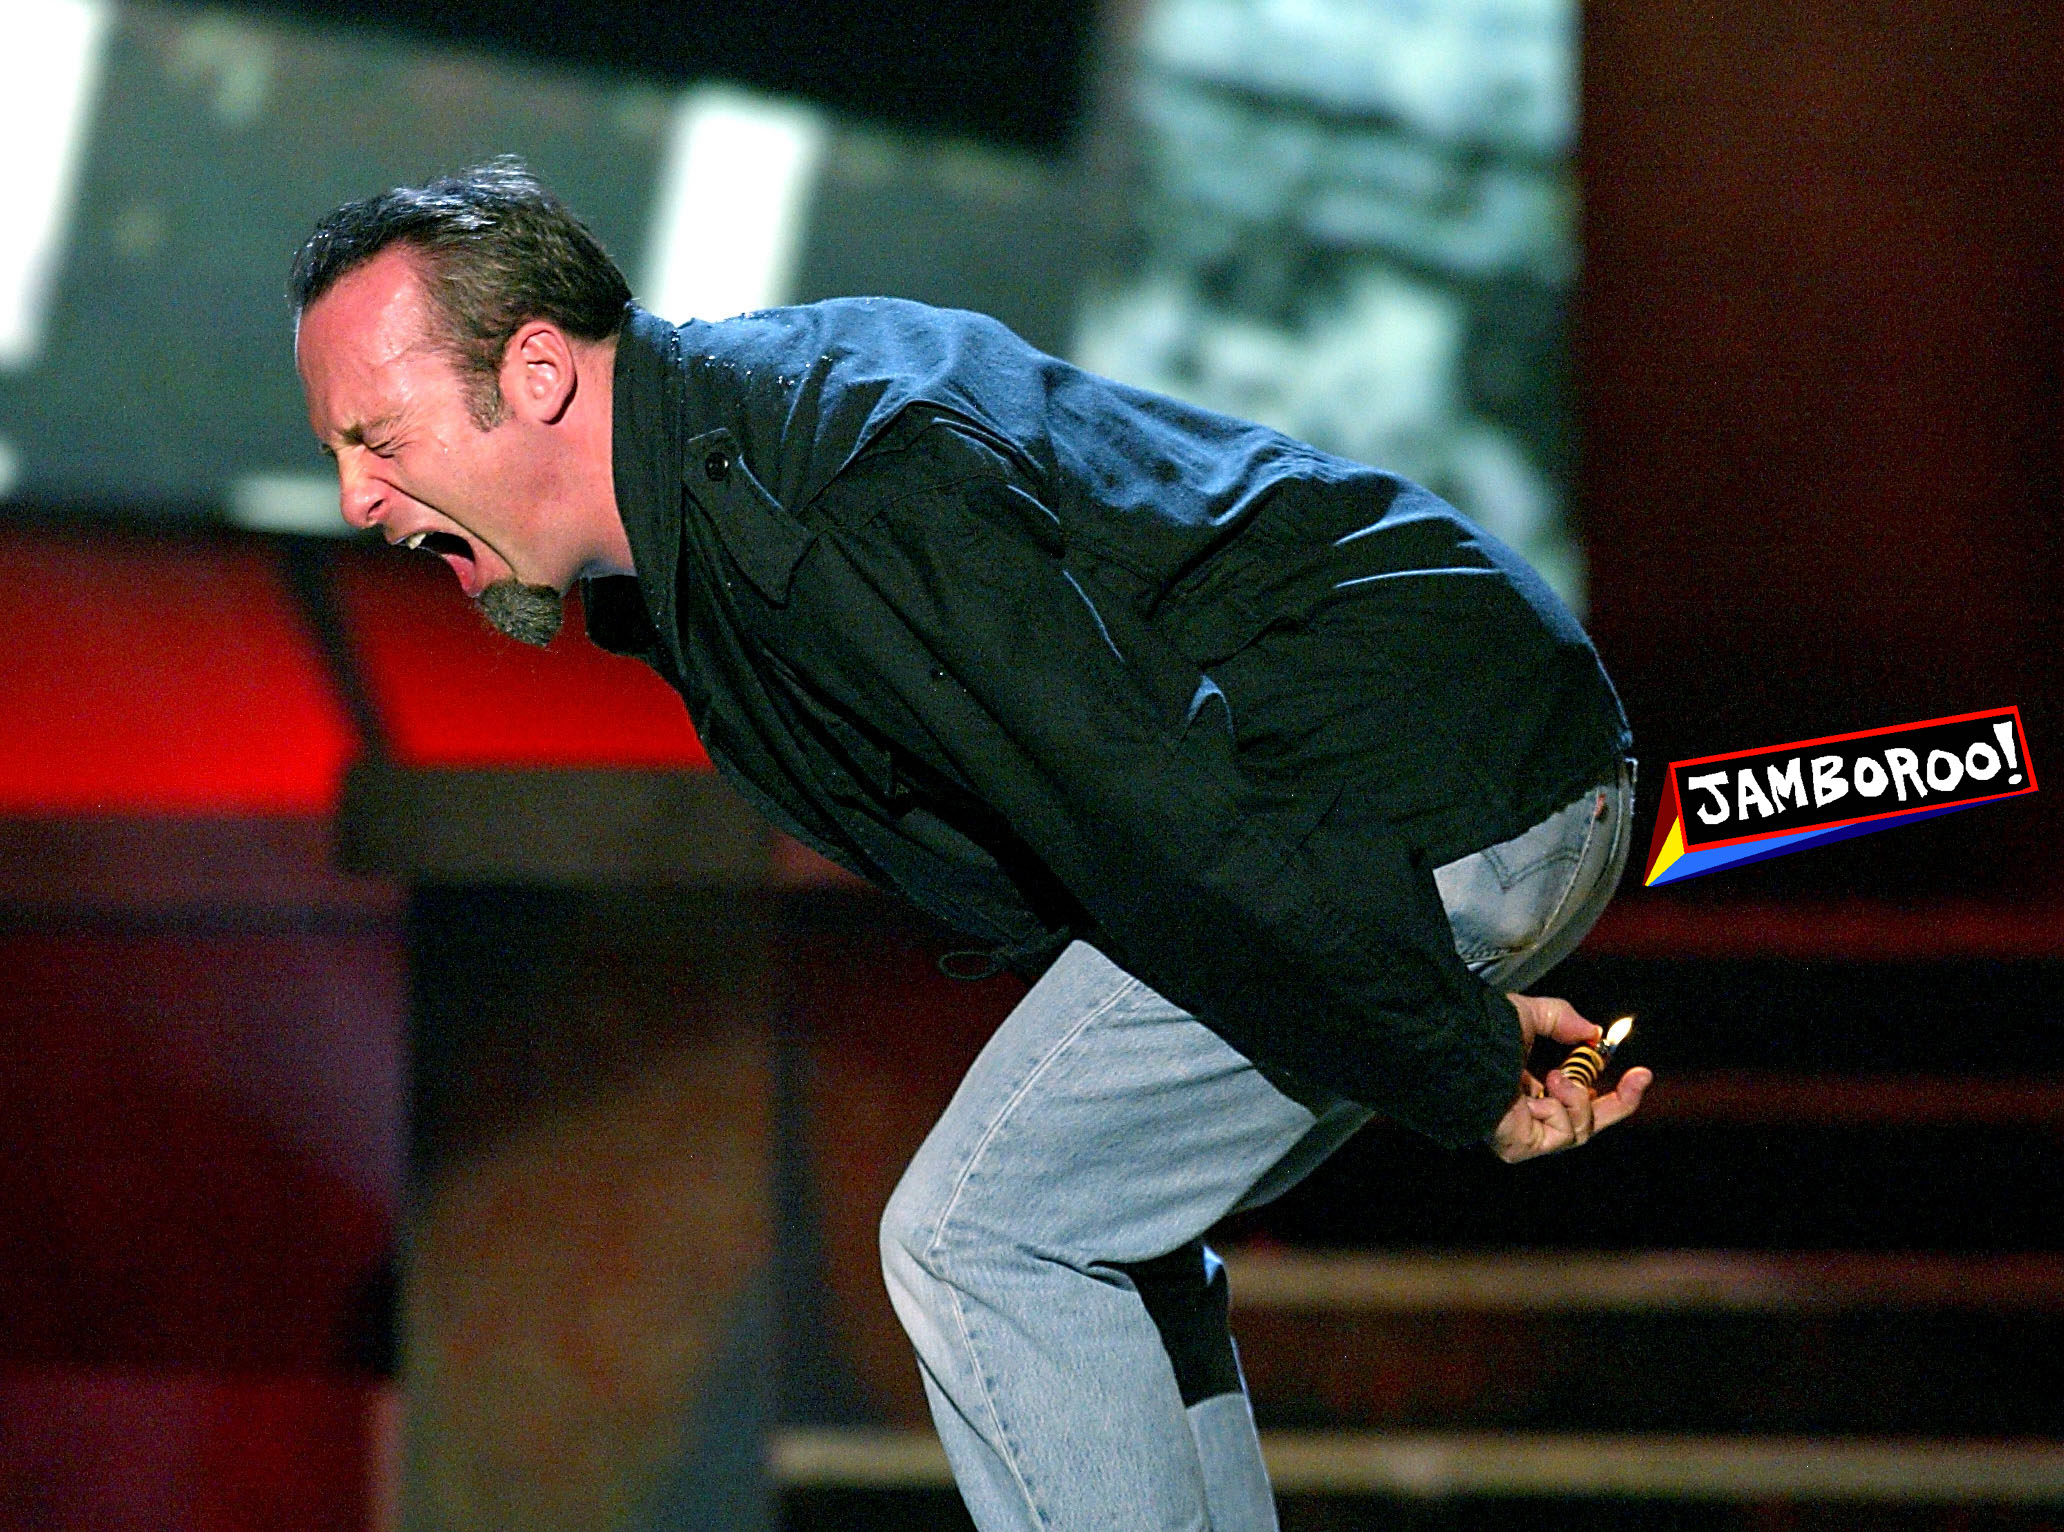 LOS ANGELES - NOVEMBER 22: ***U.S. TABLOIDS OUT*** Actor Bob Odenkirk farts during Comedy Central's First Ever Awards Show "The Commies" at Sony Pictures Studios in Culver City, California. "The Commies" will air December 7, 2003 at 9pm pst on Comedy Central. (Photo by Kevin Winter/Getty Images)